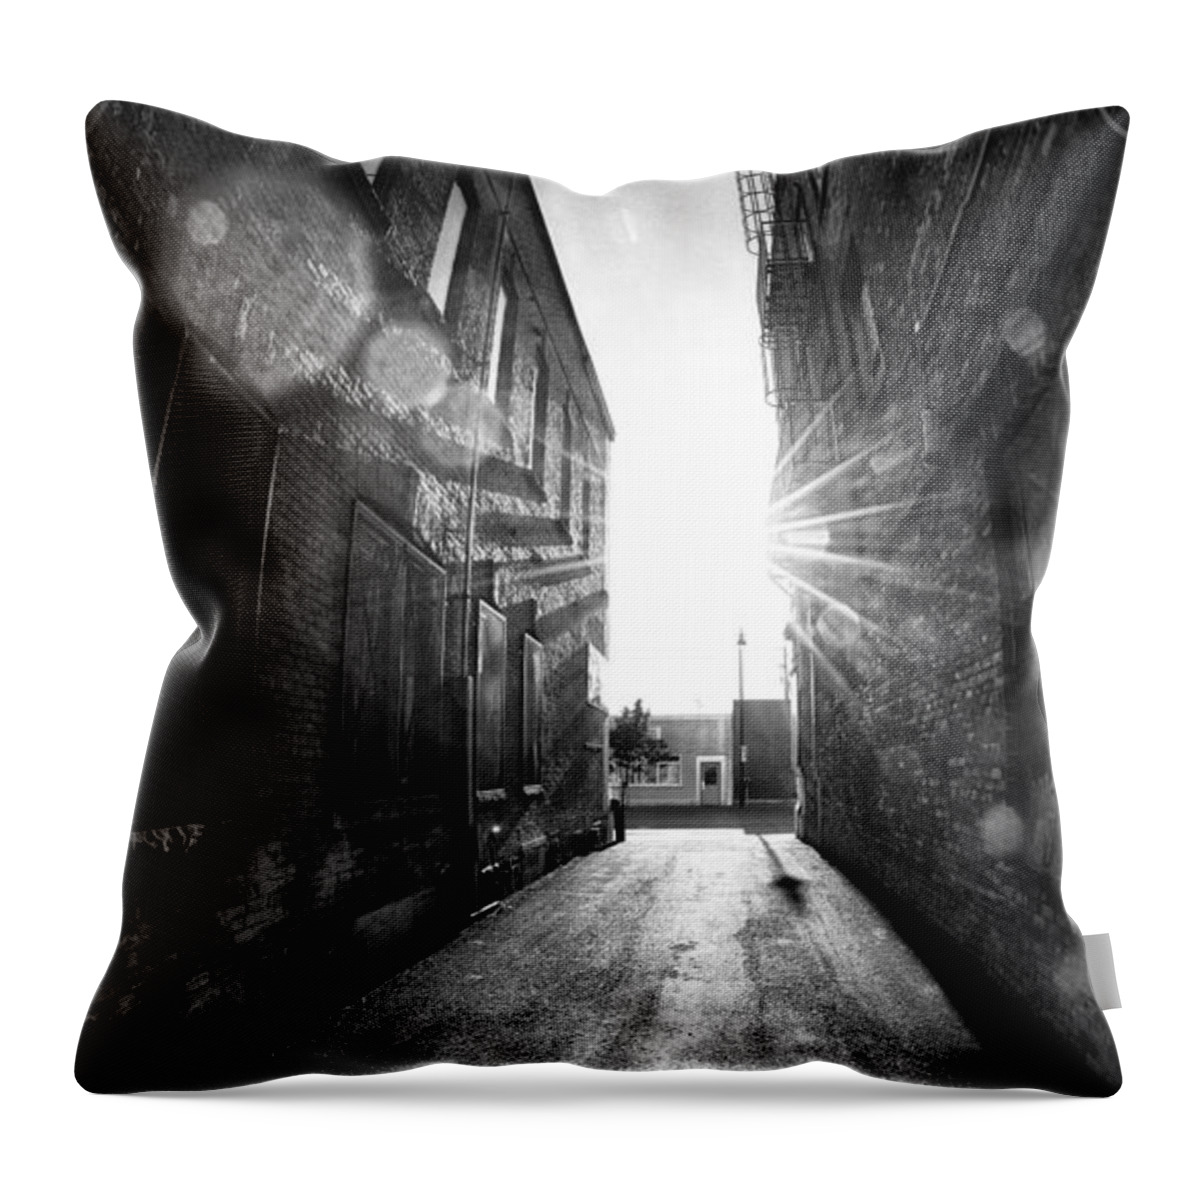 Abandoned Throw Pillow featuring the photograph Random City Street Sunrize Vertical pano, Lens Flare by Jakub Sisak